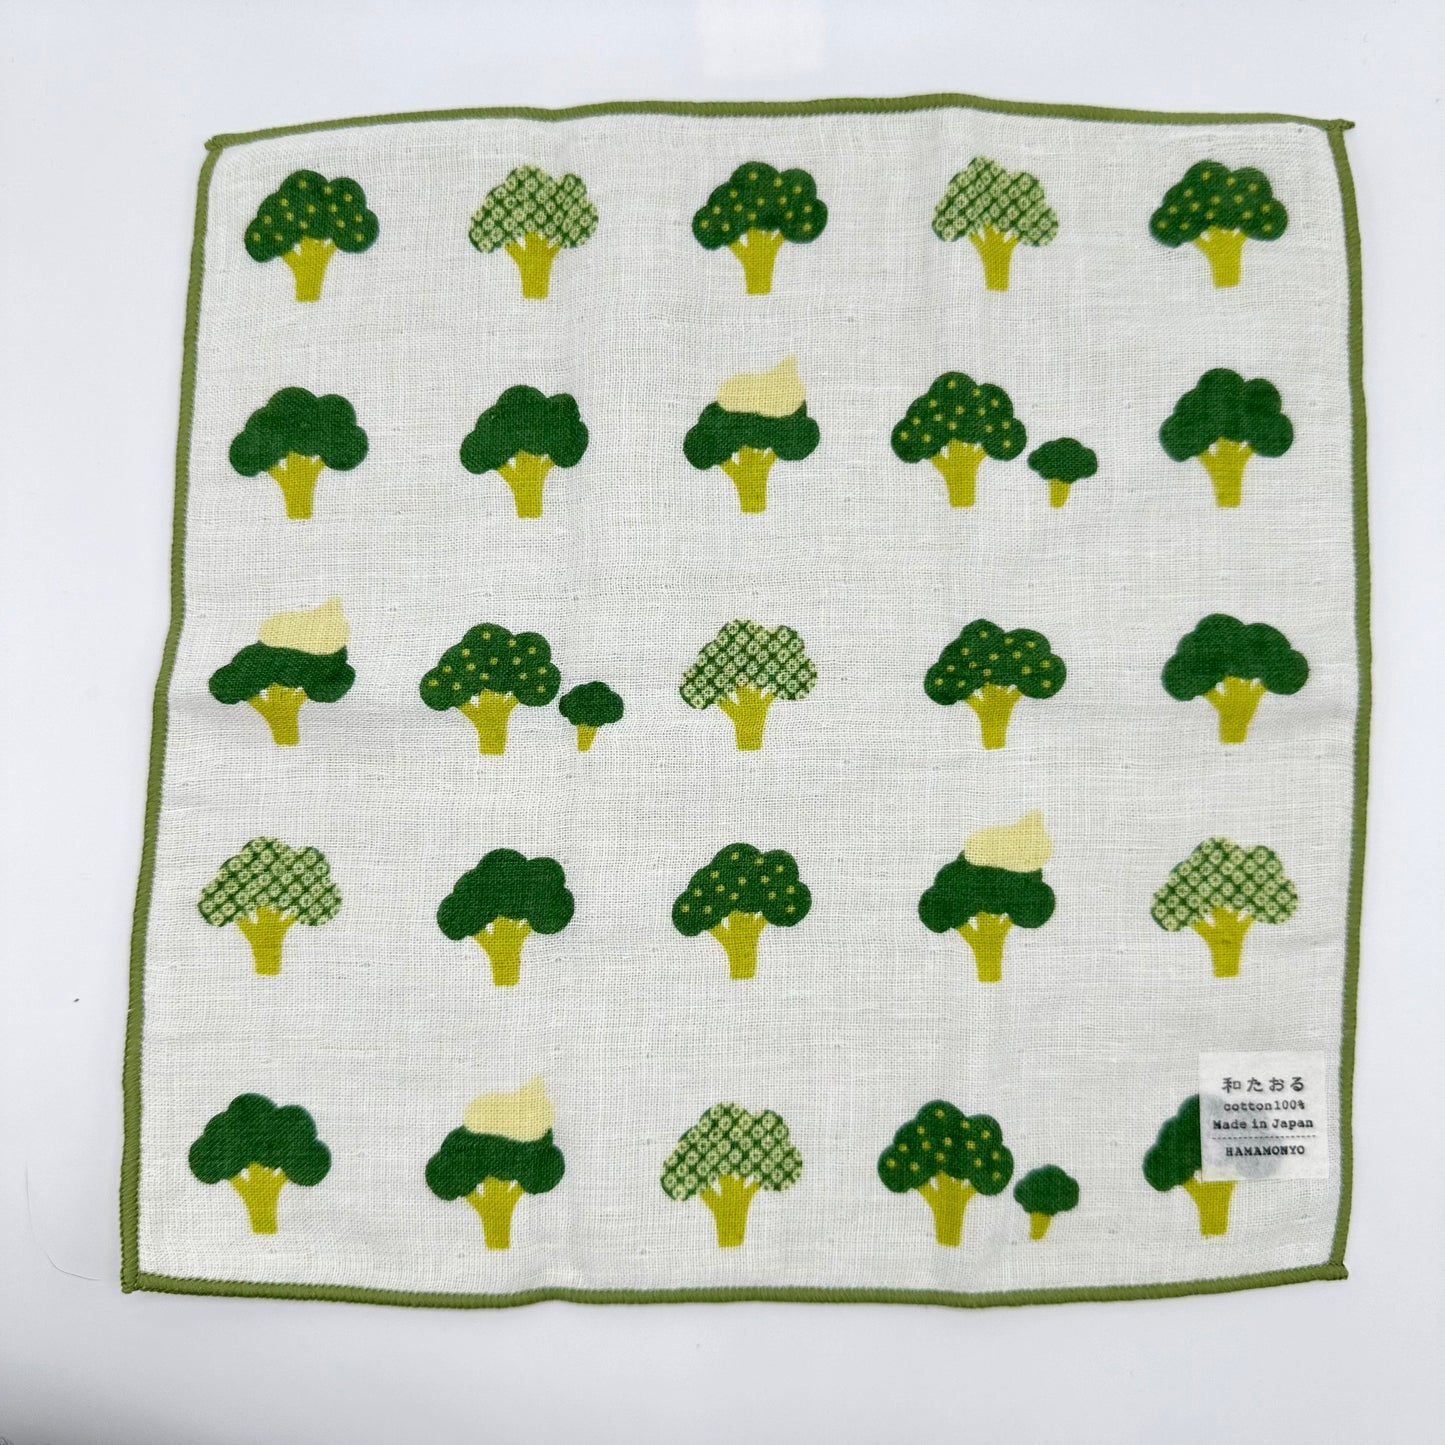 Hand towel with assorted broccoli